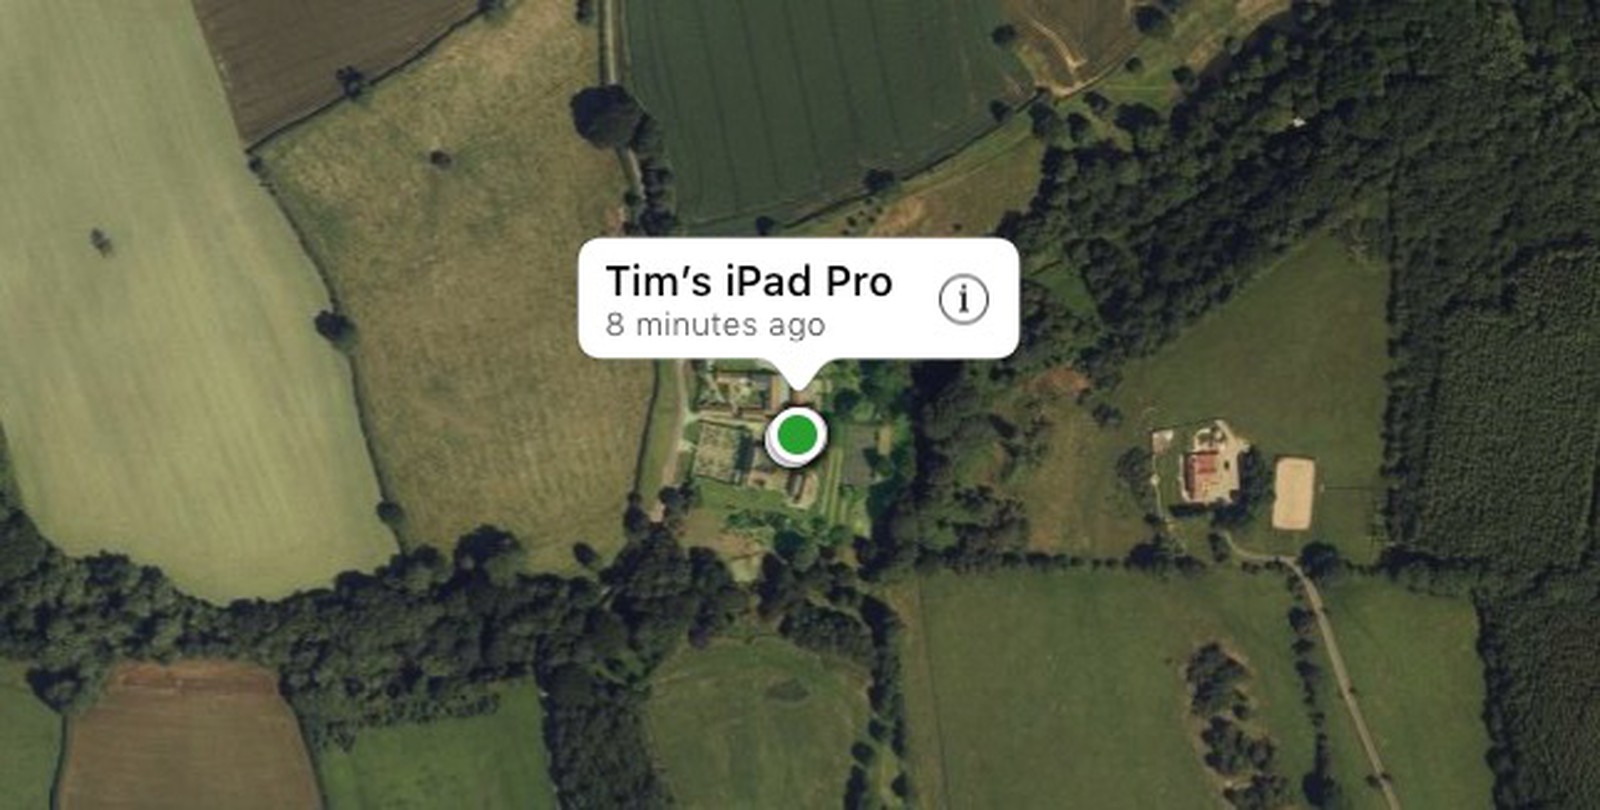 get find my iphone on mac